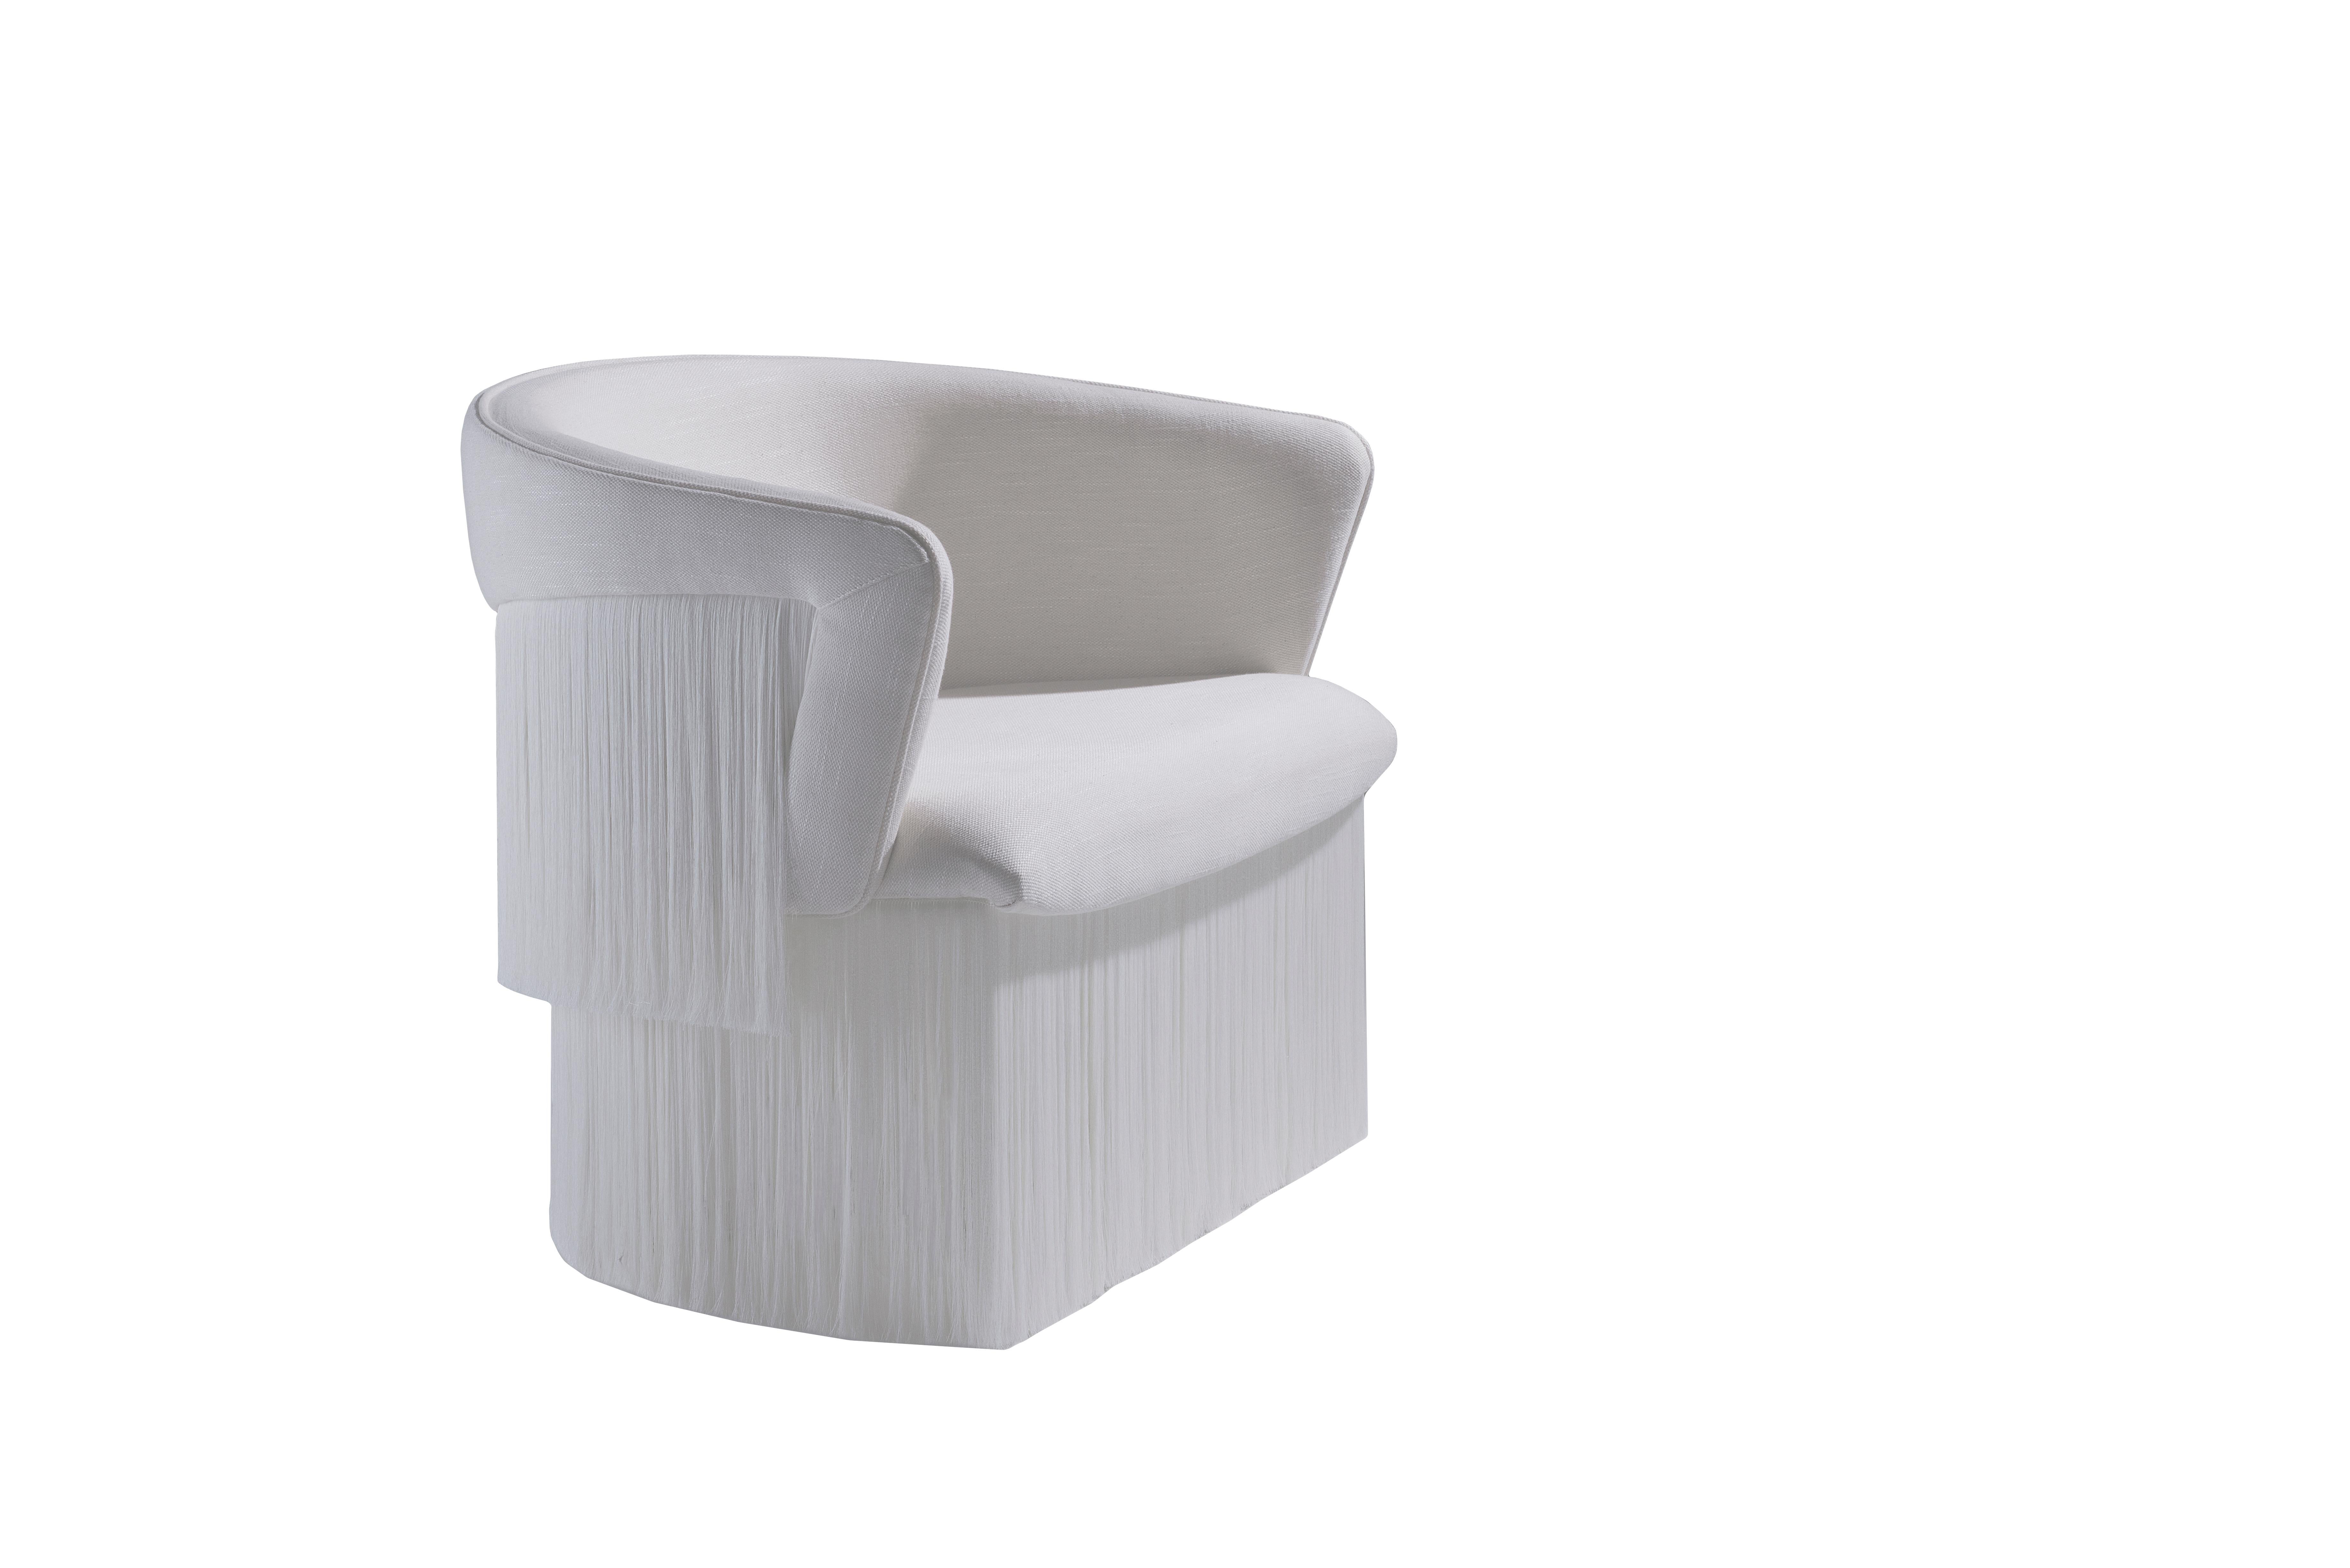 Breeze armchair, is upholstered in natural linen fabric, features fringed silk yarns off-white color. It has four internally rotating aluminum feet.